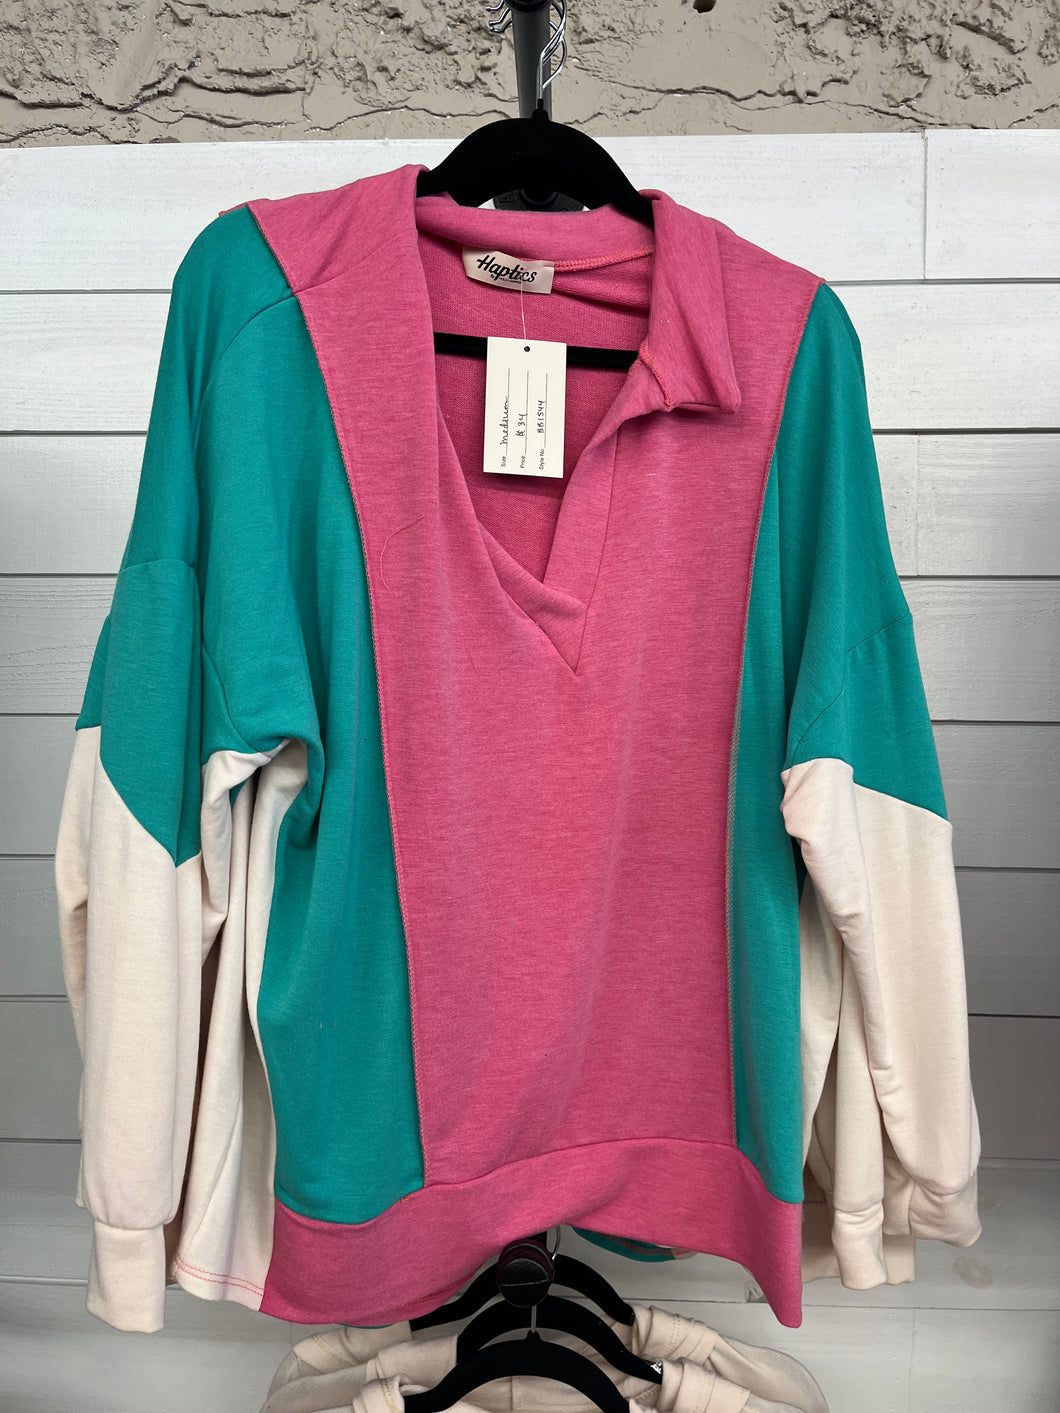 Pink and teal oversized top